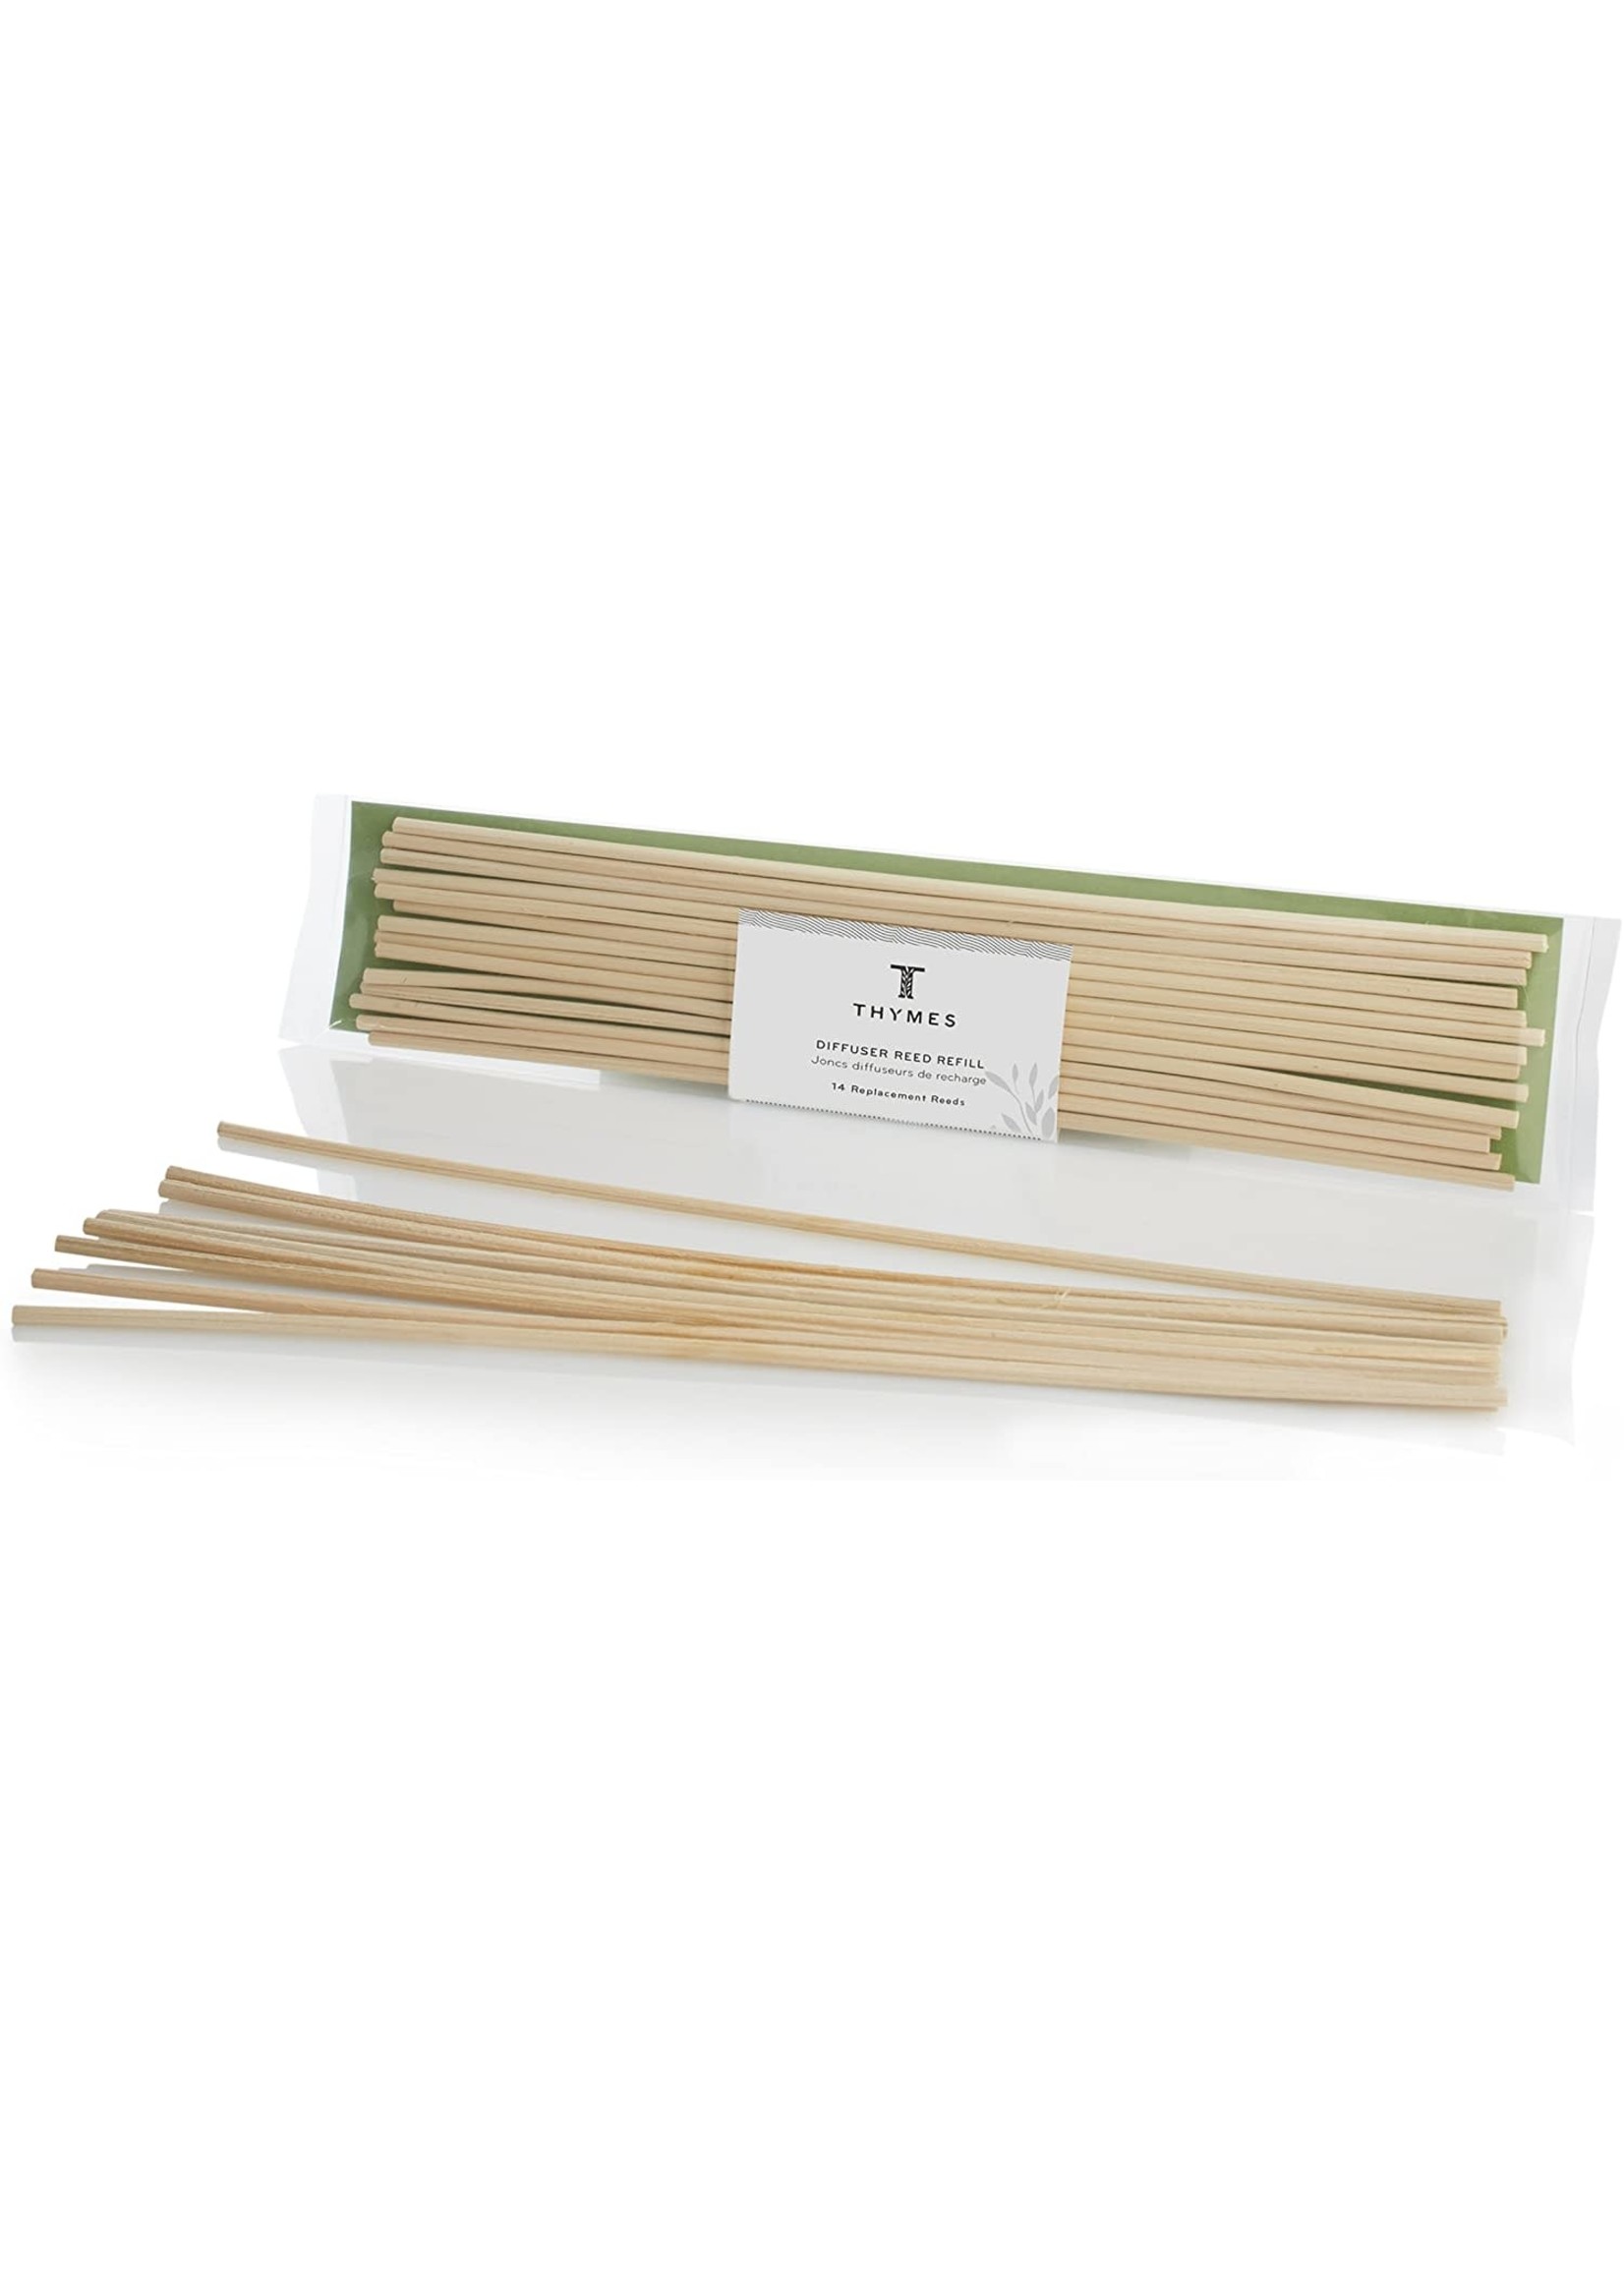 Frasier Fir Diffuser REEDS Natural Unscented 14 reed replacements